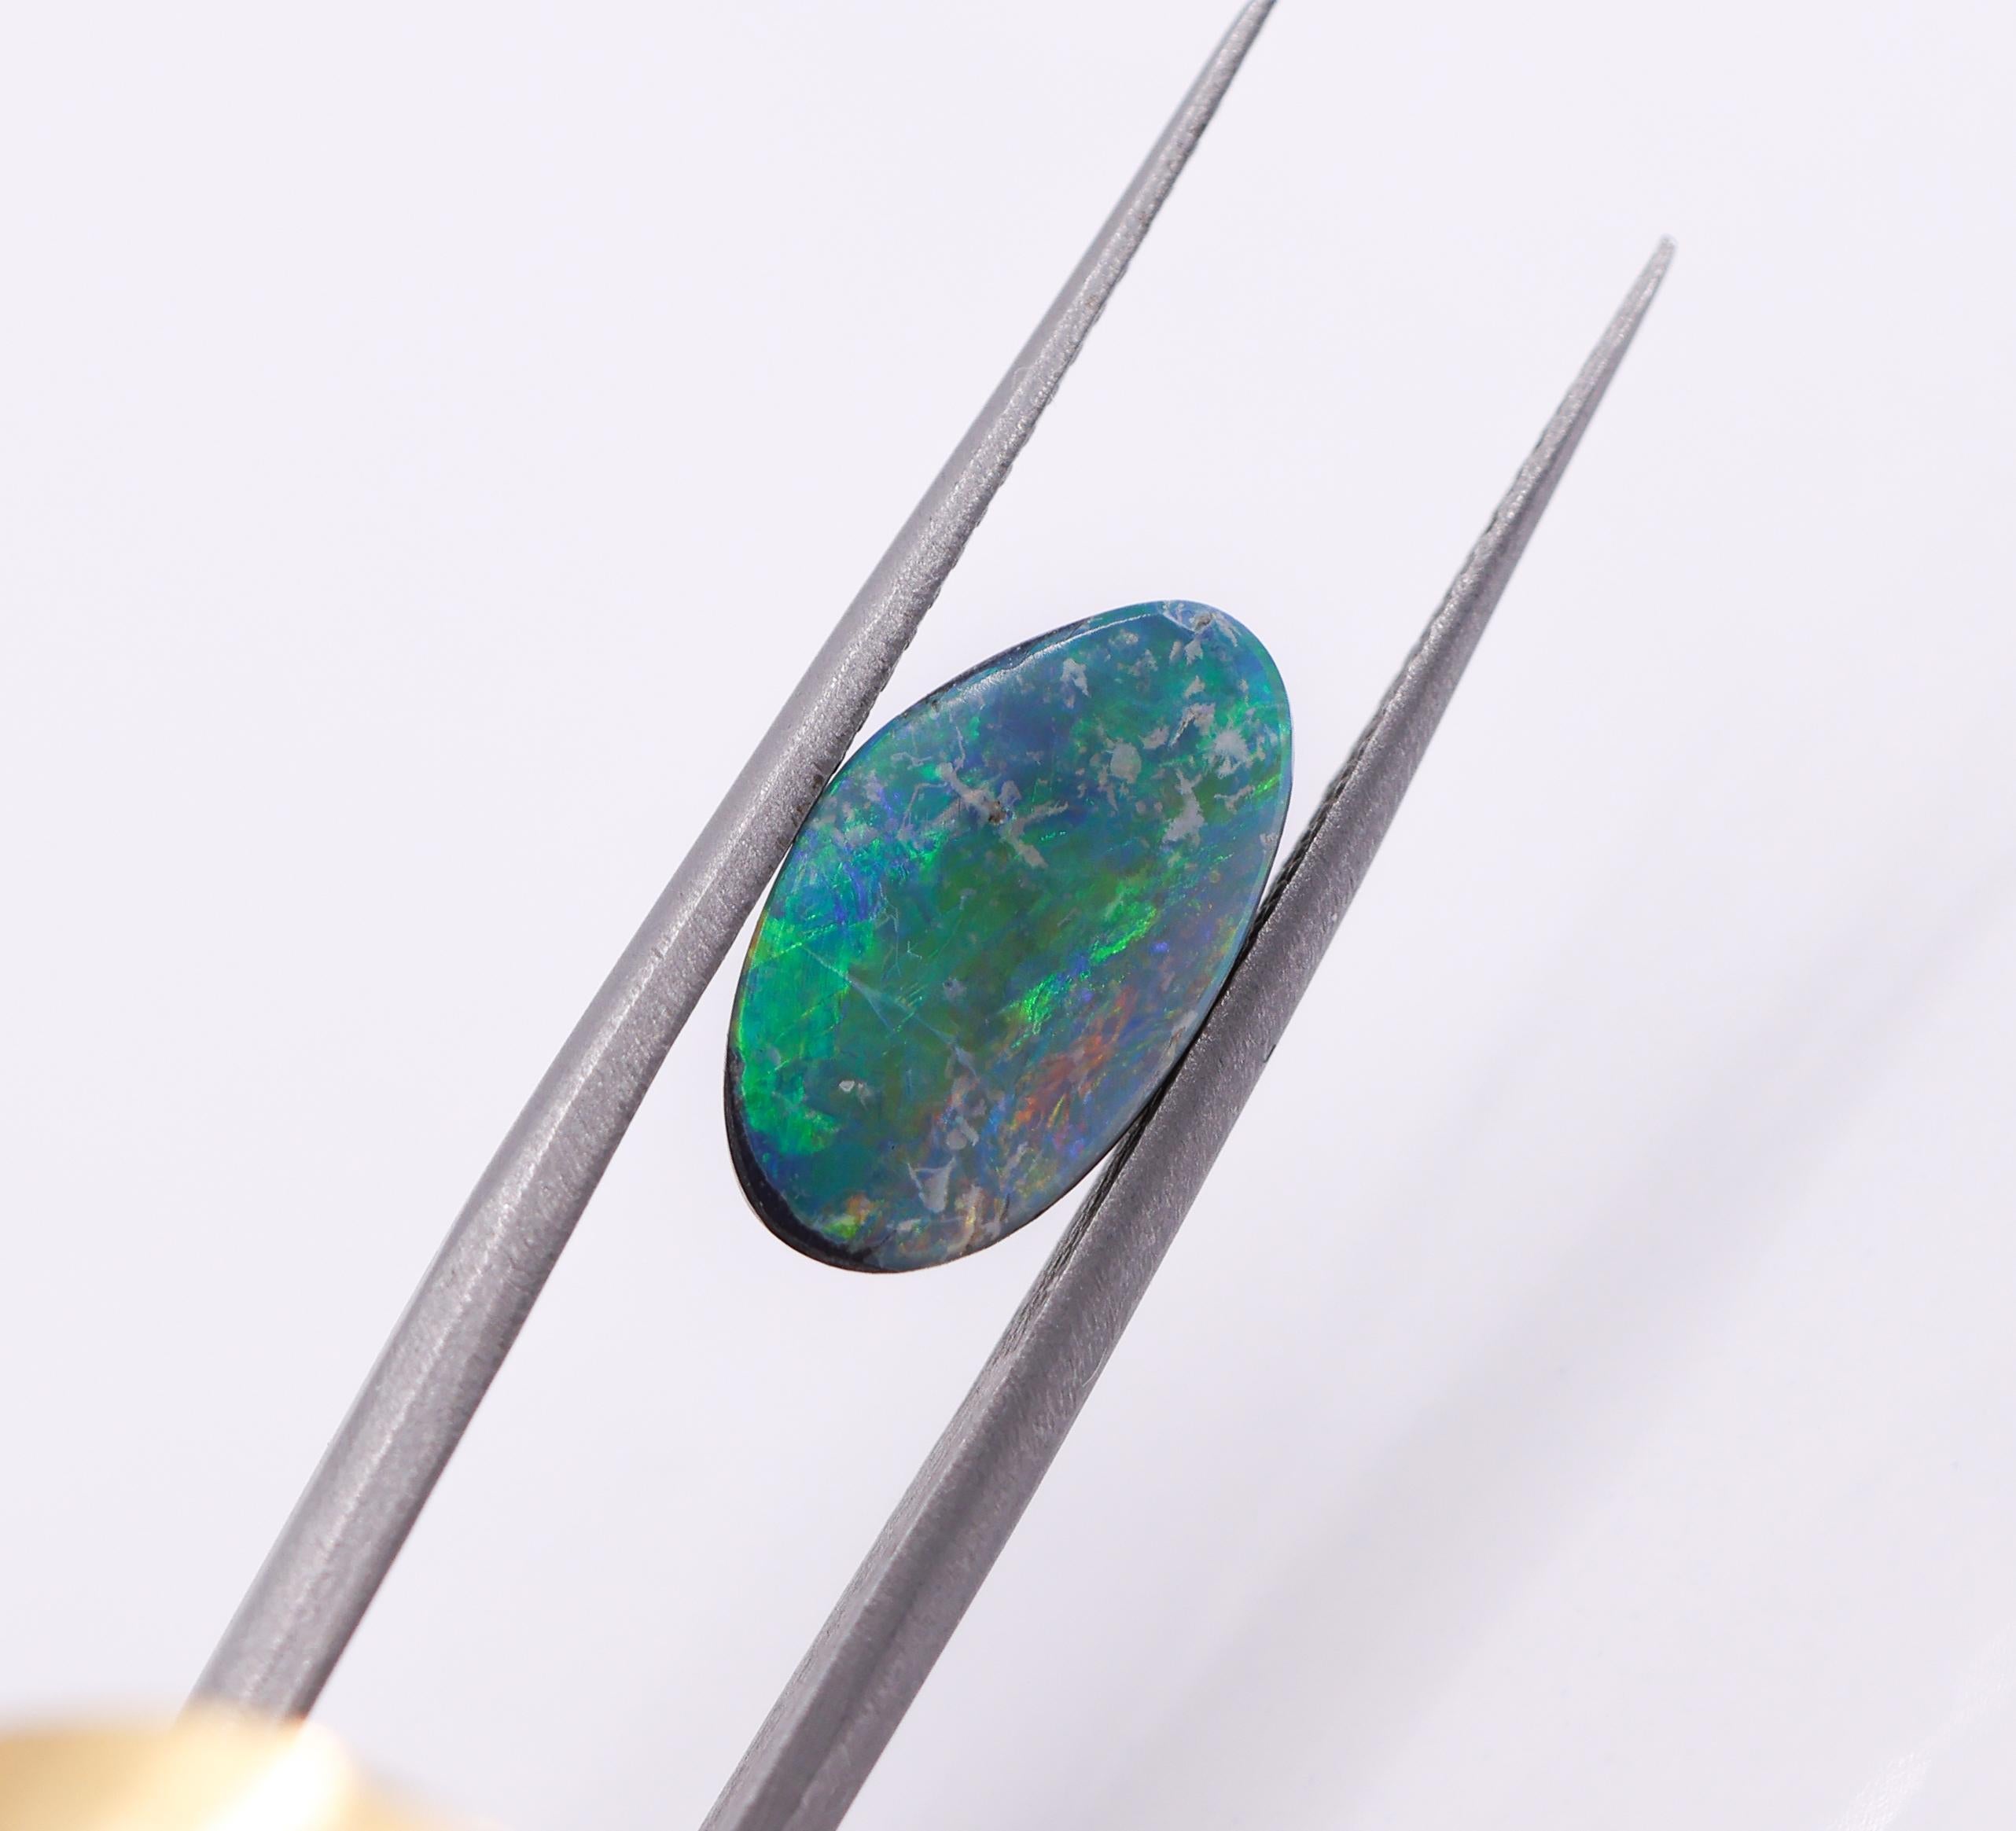 Presenting a 2.61 carat Australian boulder opal loose gemstone! Each piece is one-of-a-kind with patterns and colors as diverse as the Australian outback itself! 

Specifications

Stone: Boulder Opal
Shape: Oval
Treatment: None
Hardness: 5.5 -